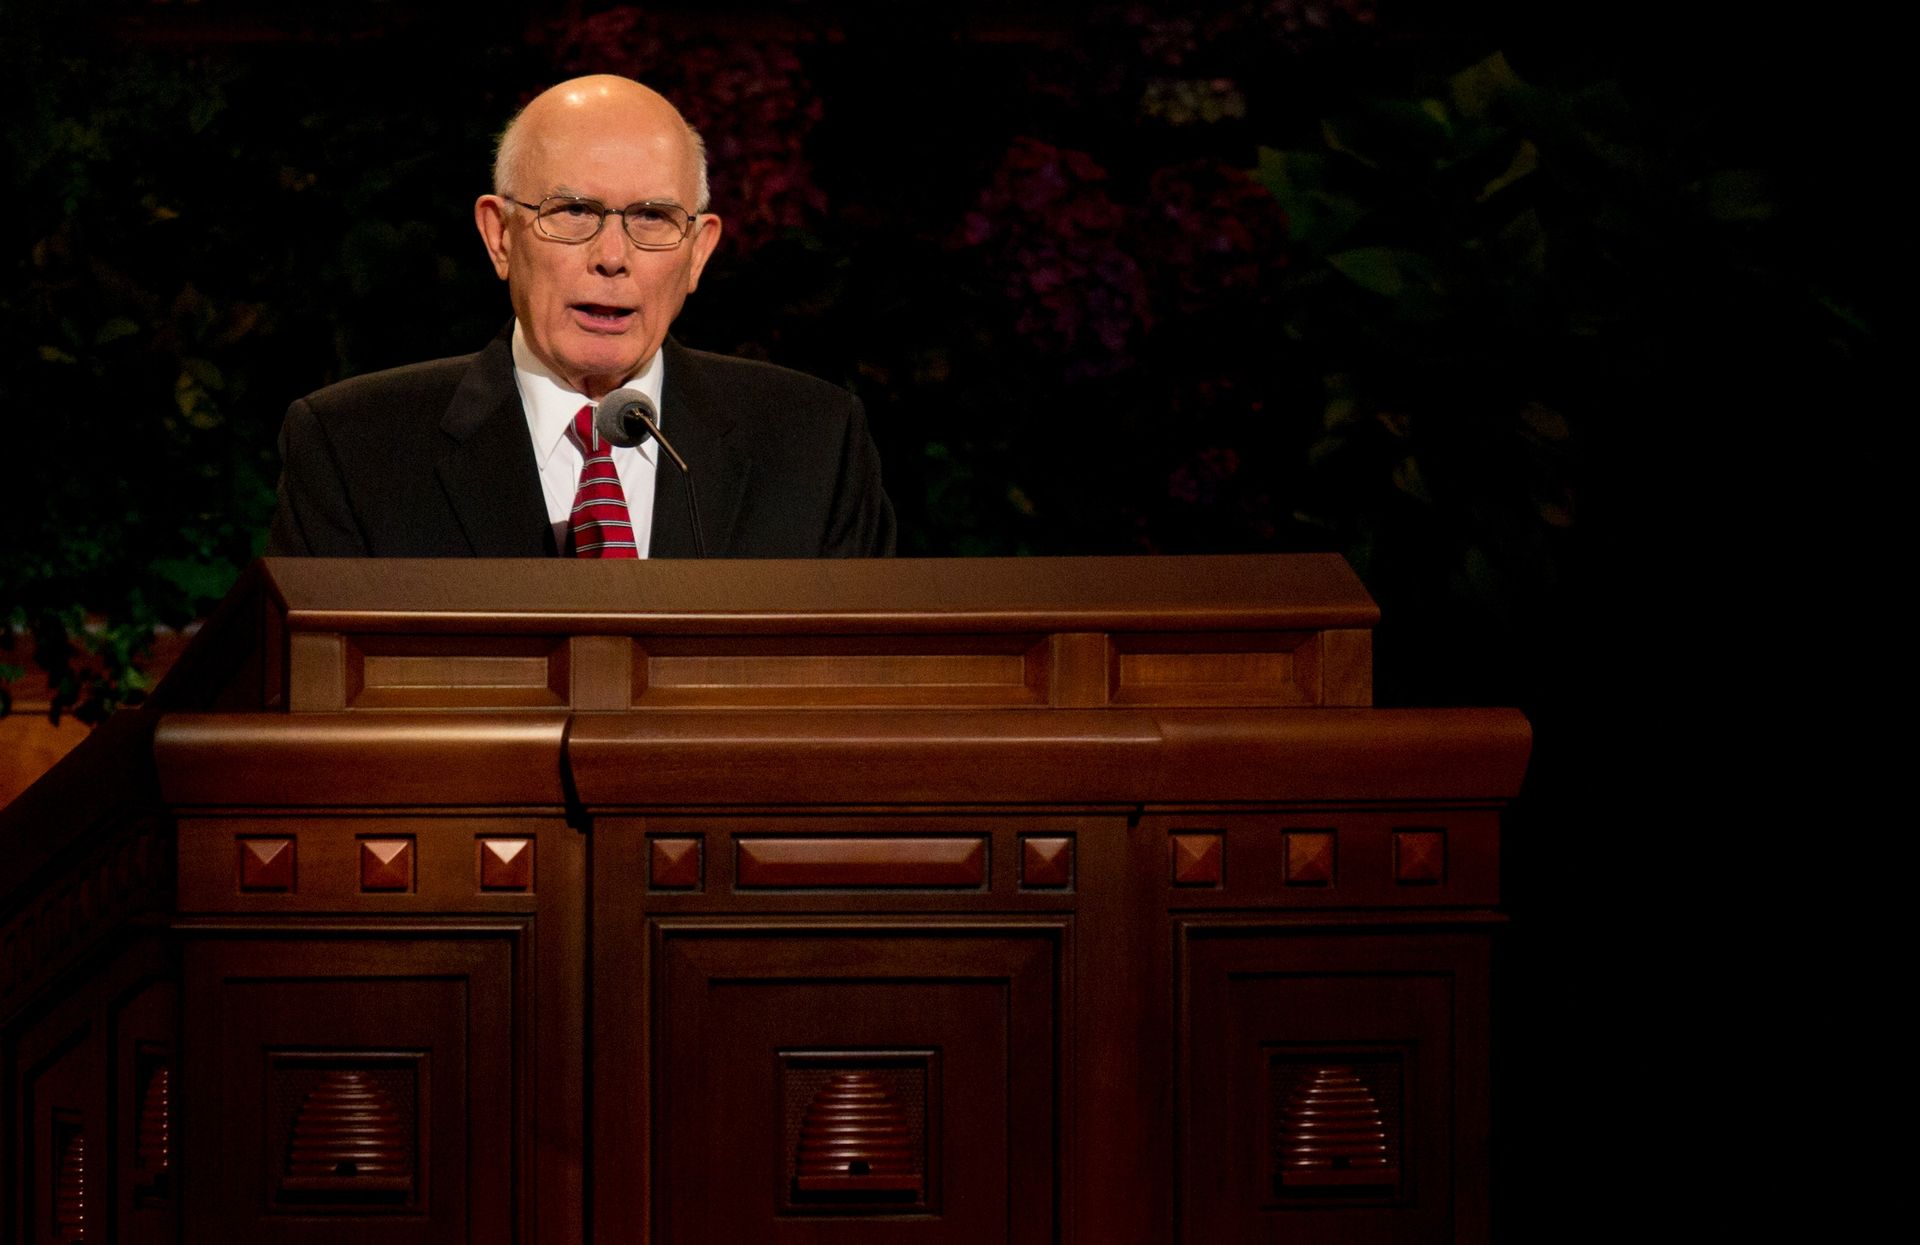 Dallin H. Oaks standing and addressing the congregation at general conference.